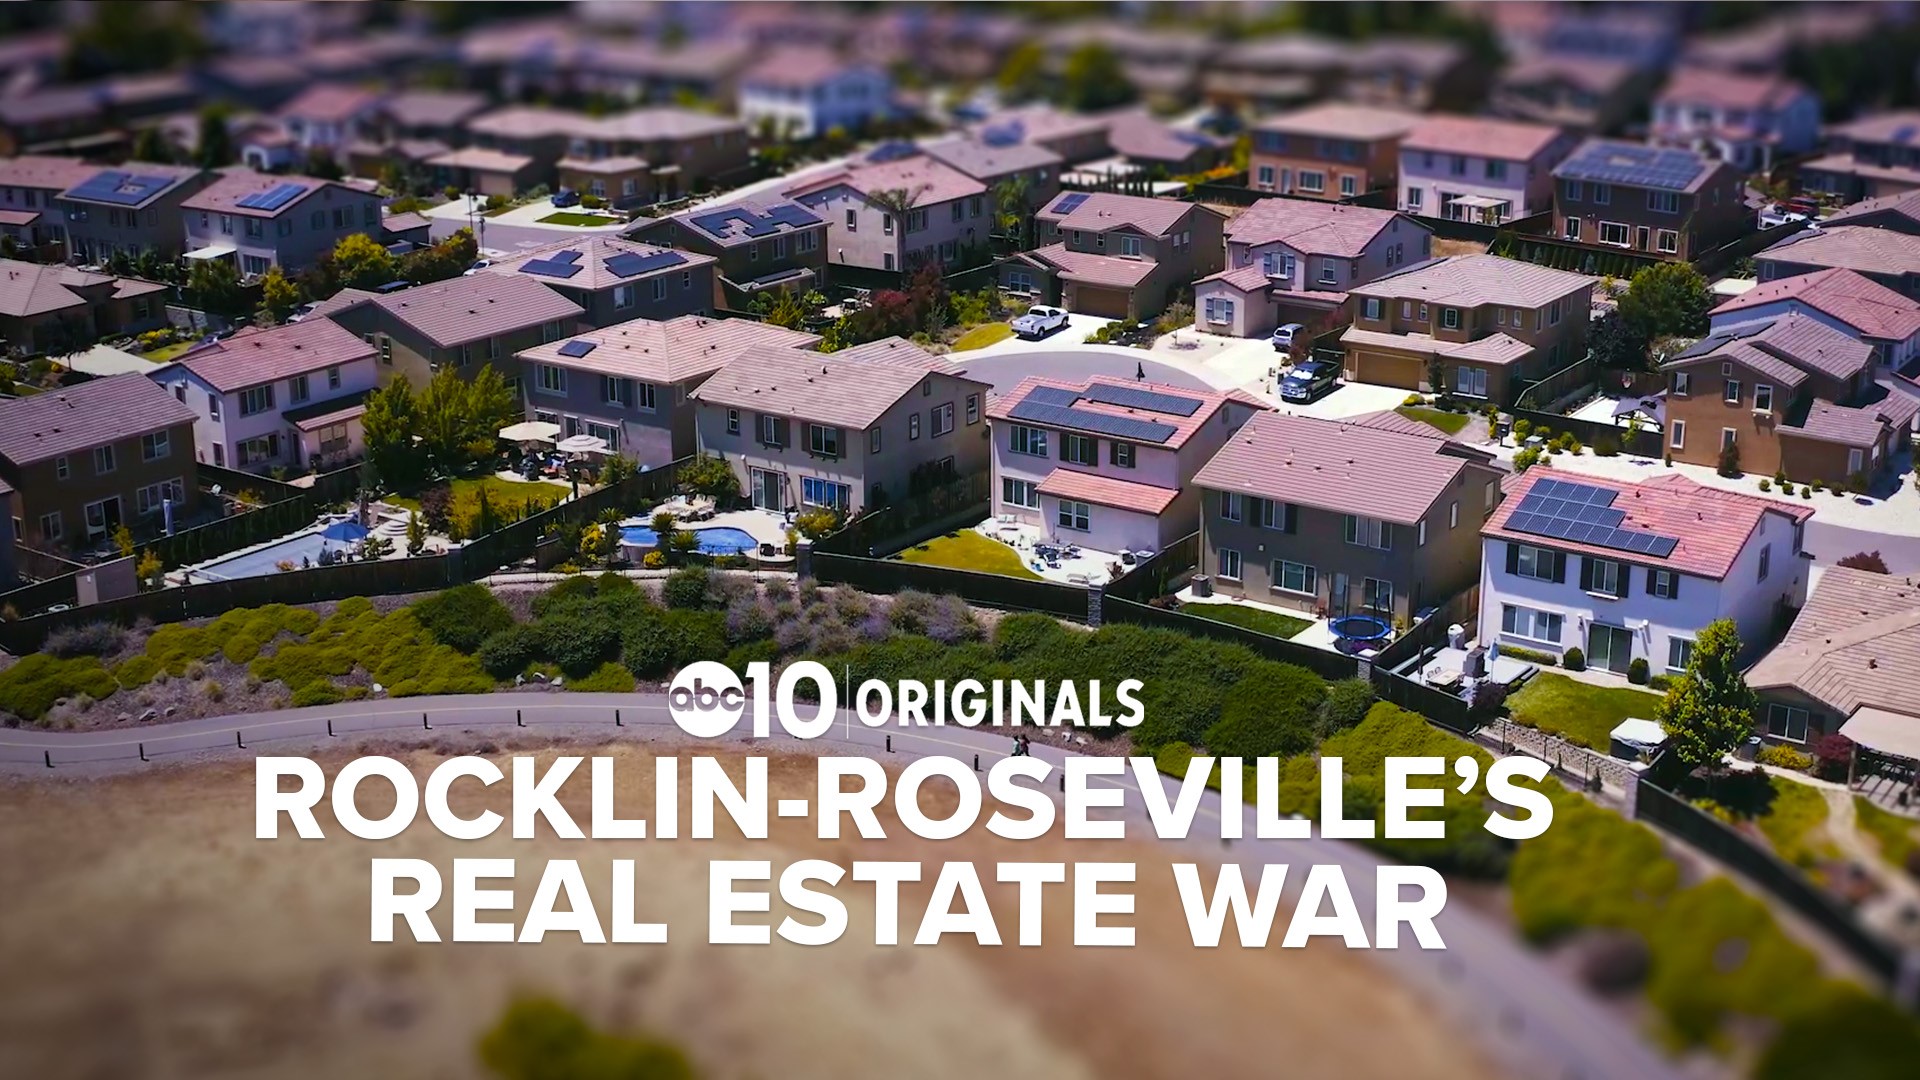 While the influx of people moving to areas like Roseville and Rocklin increases the cost of living, some experts said it's great for the region.